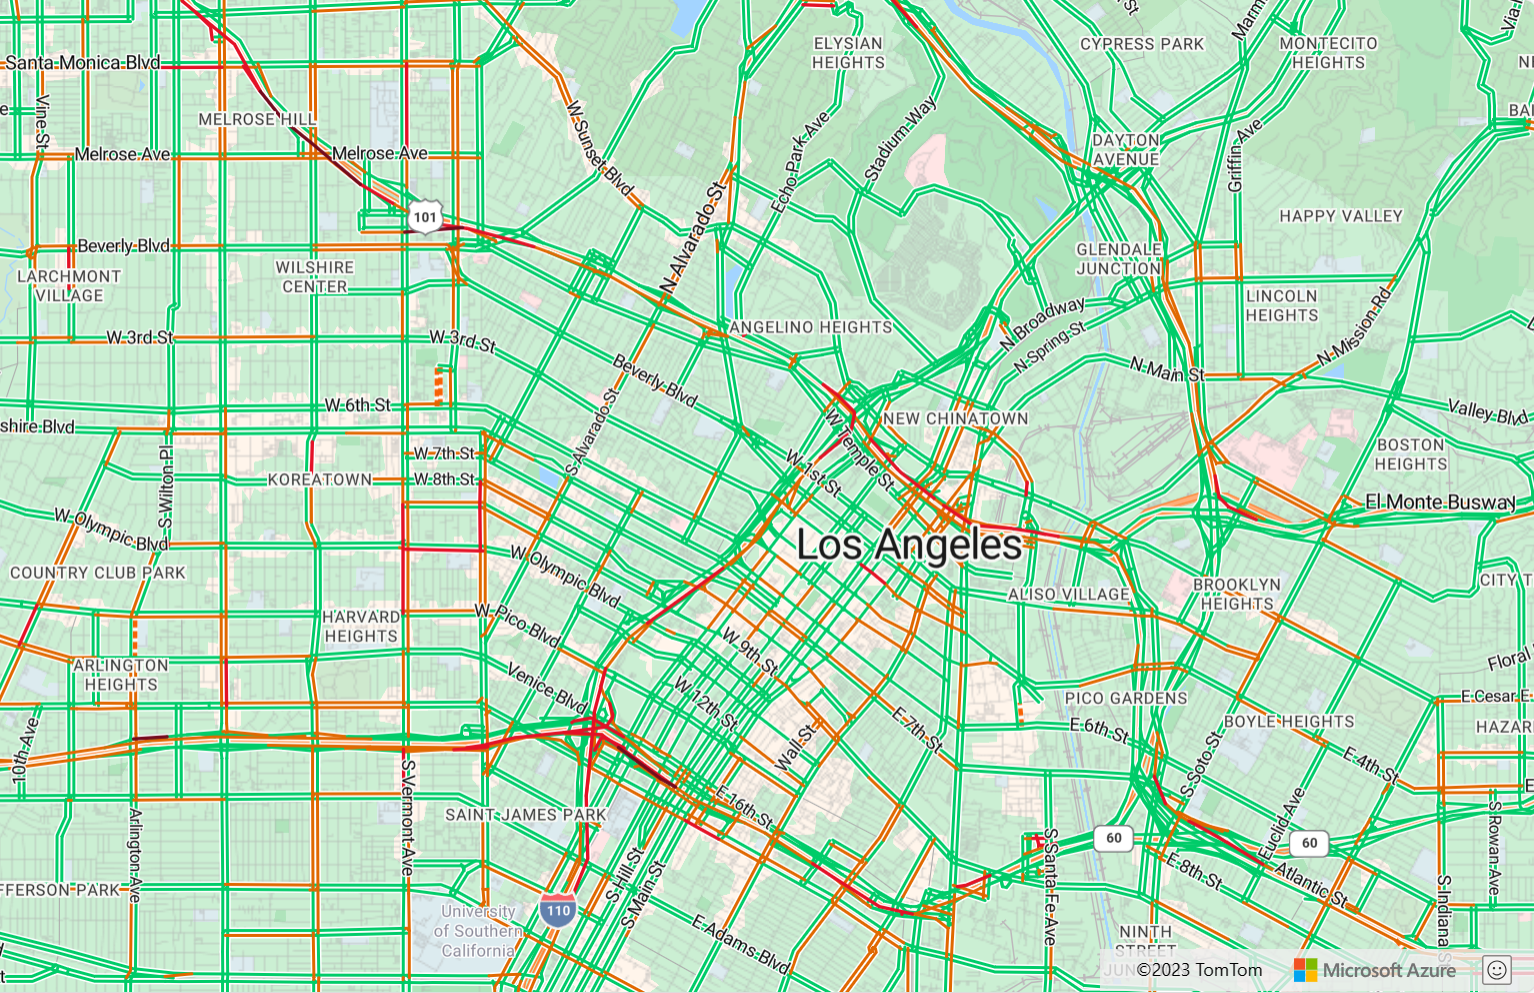 A screenshot that shows a map of Los Angeles, with the streets displaying traffic flow data.